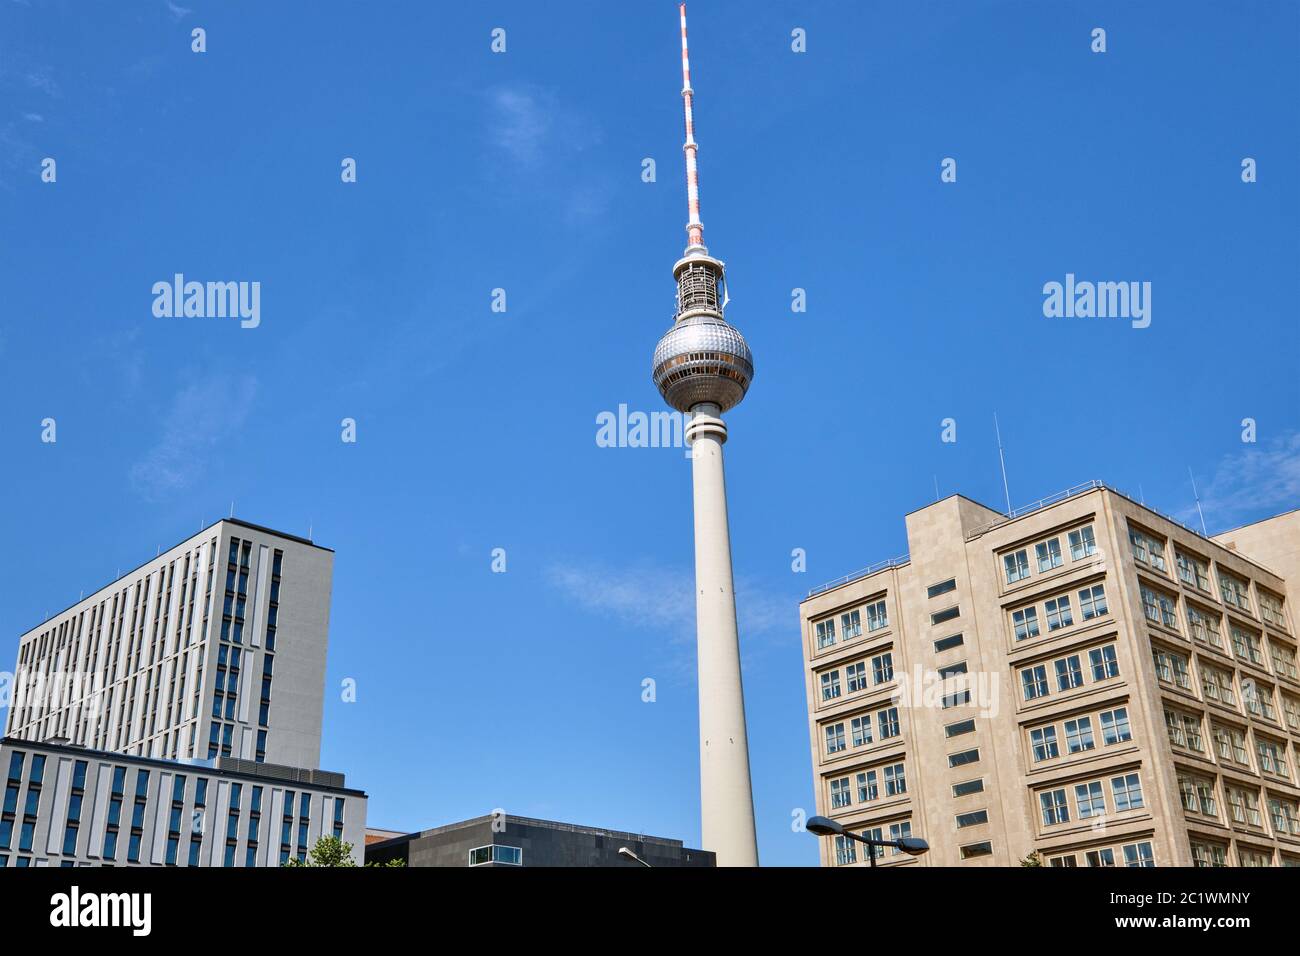 The Television Tower, Berlins most famous landmark, on a sunny day Stock Photo